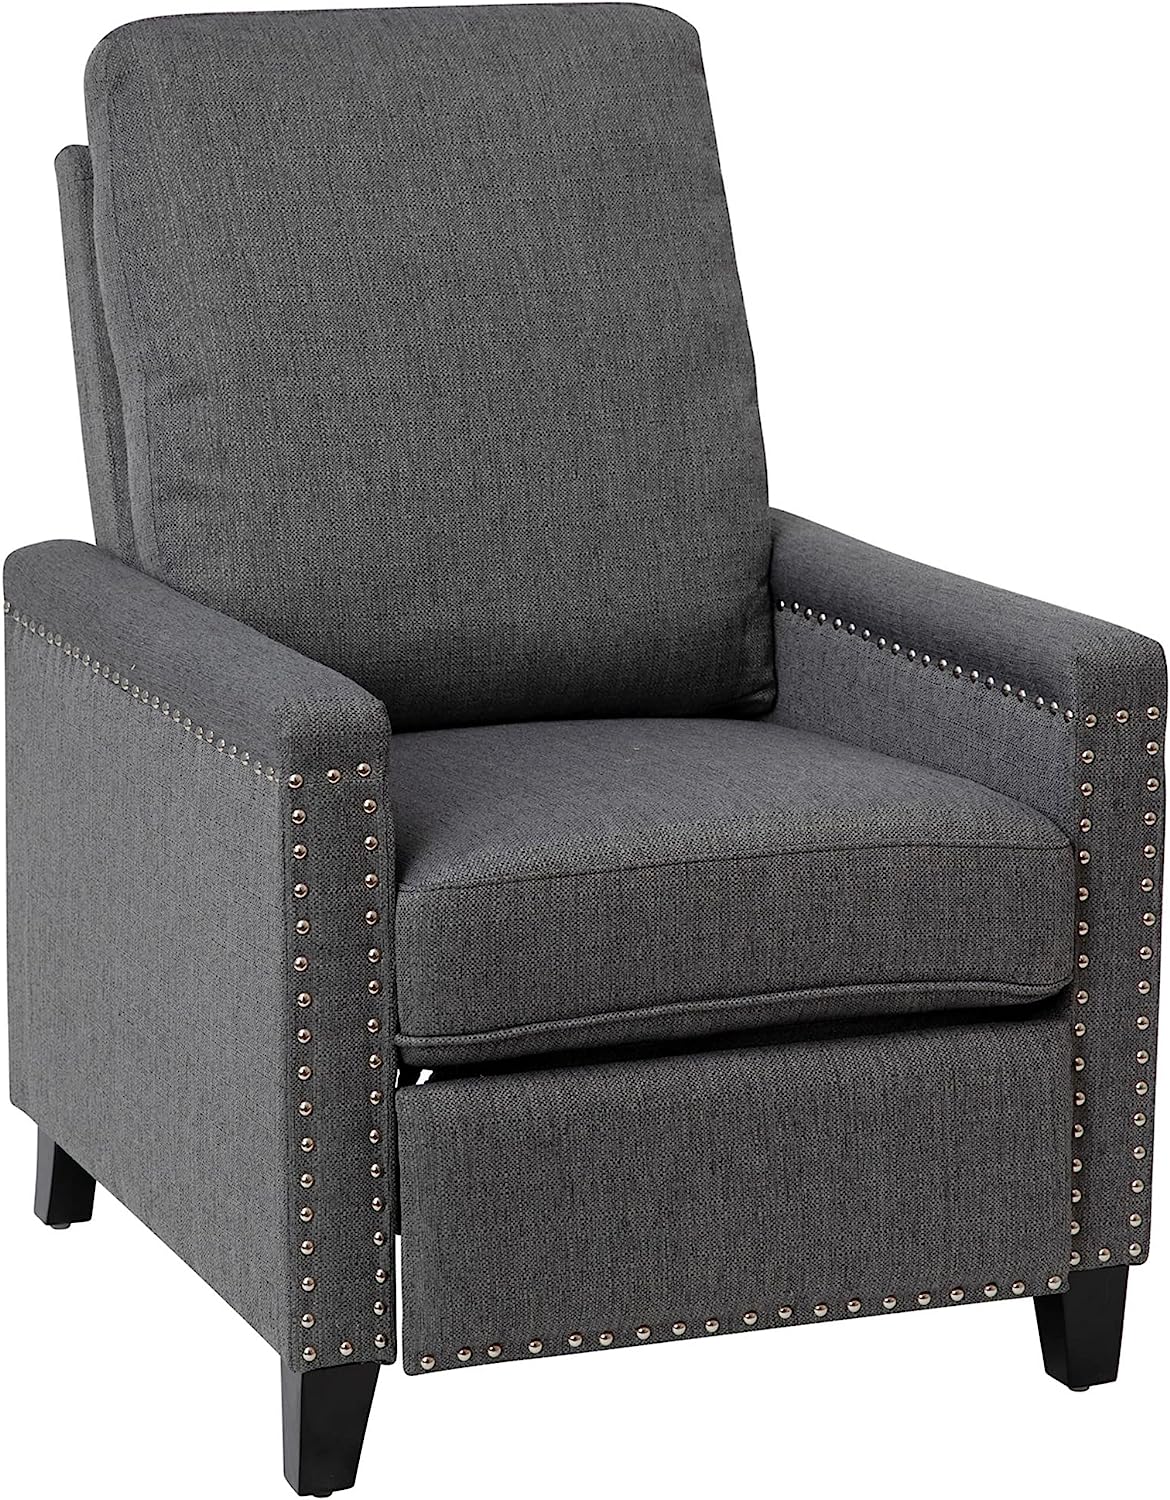 Flash Furniture Carson Transitional Style Push Back Recliner Chair - Pillow Back Recliner - Gray Fabric Upholstery - Accent Nail Trim